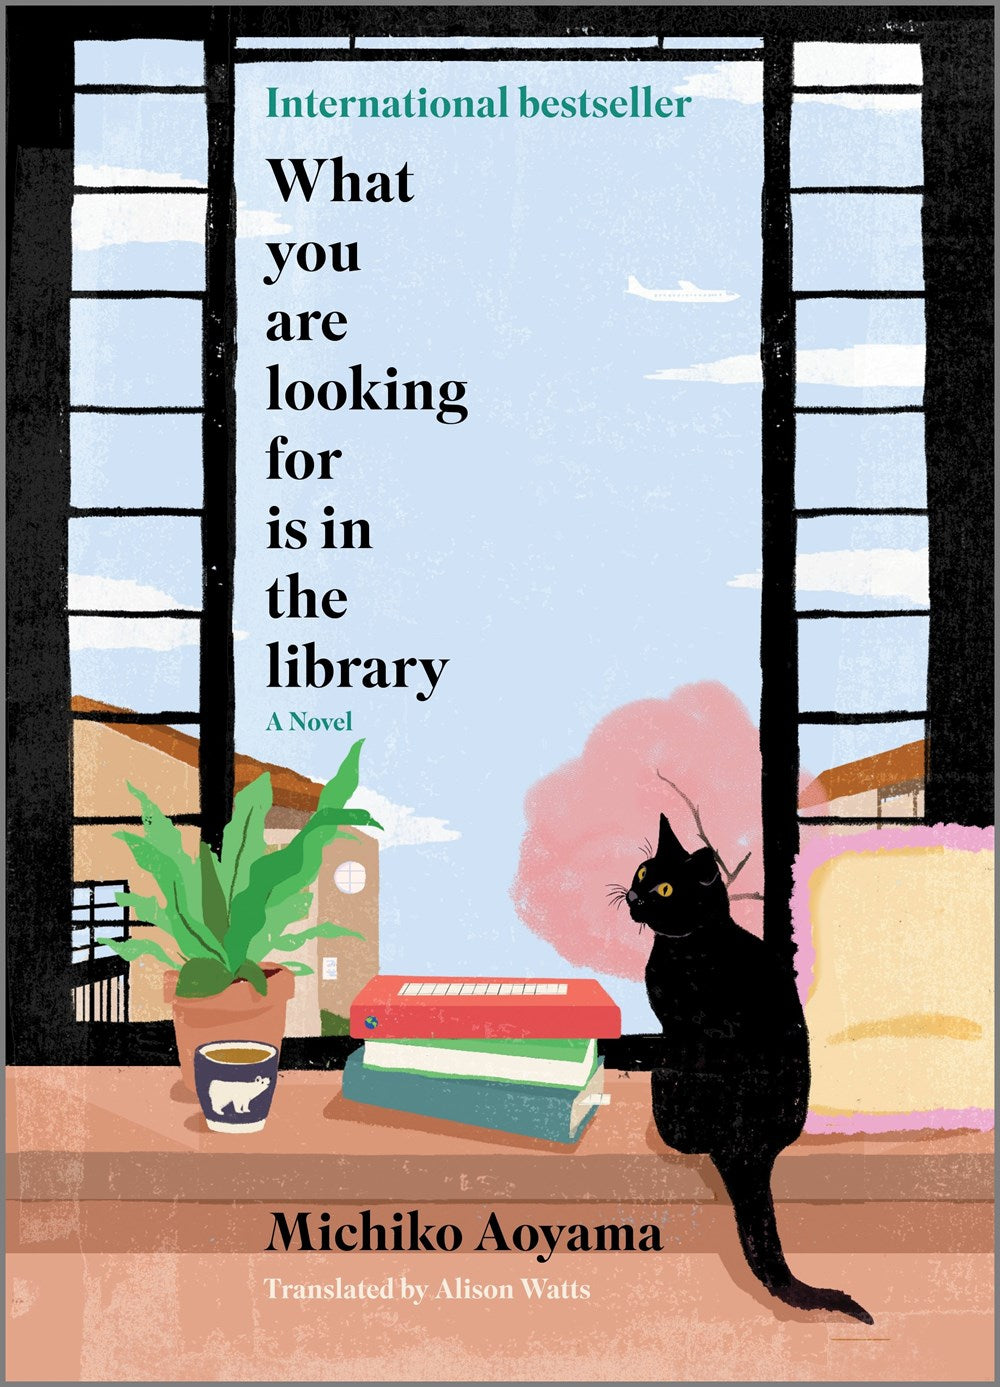 What You Are Looking Is In the Library: A Novel by Michiko Aoyama